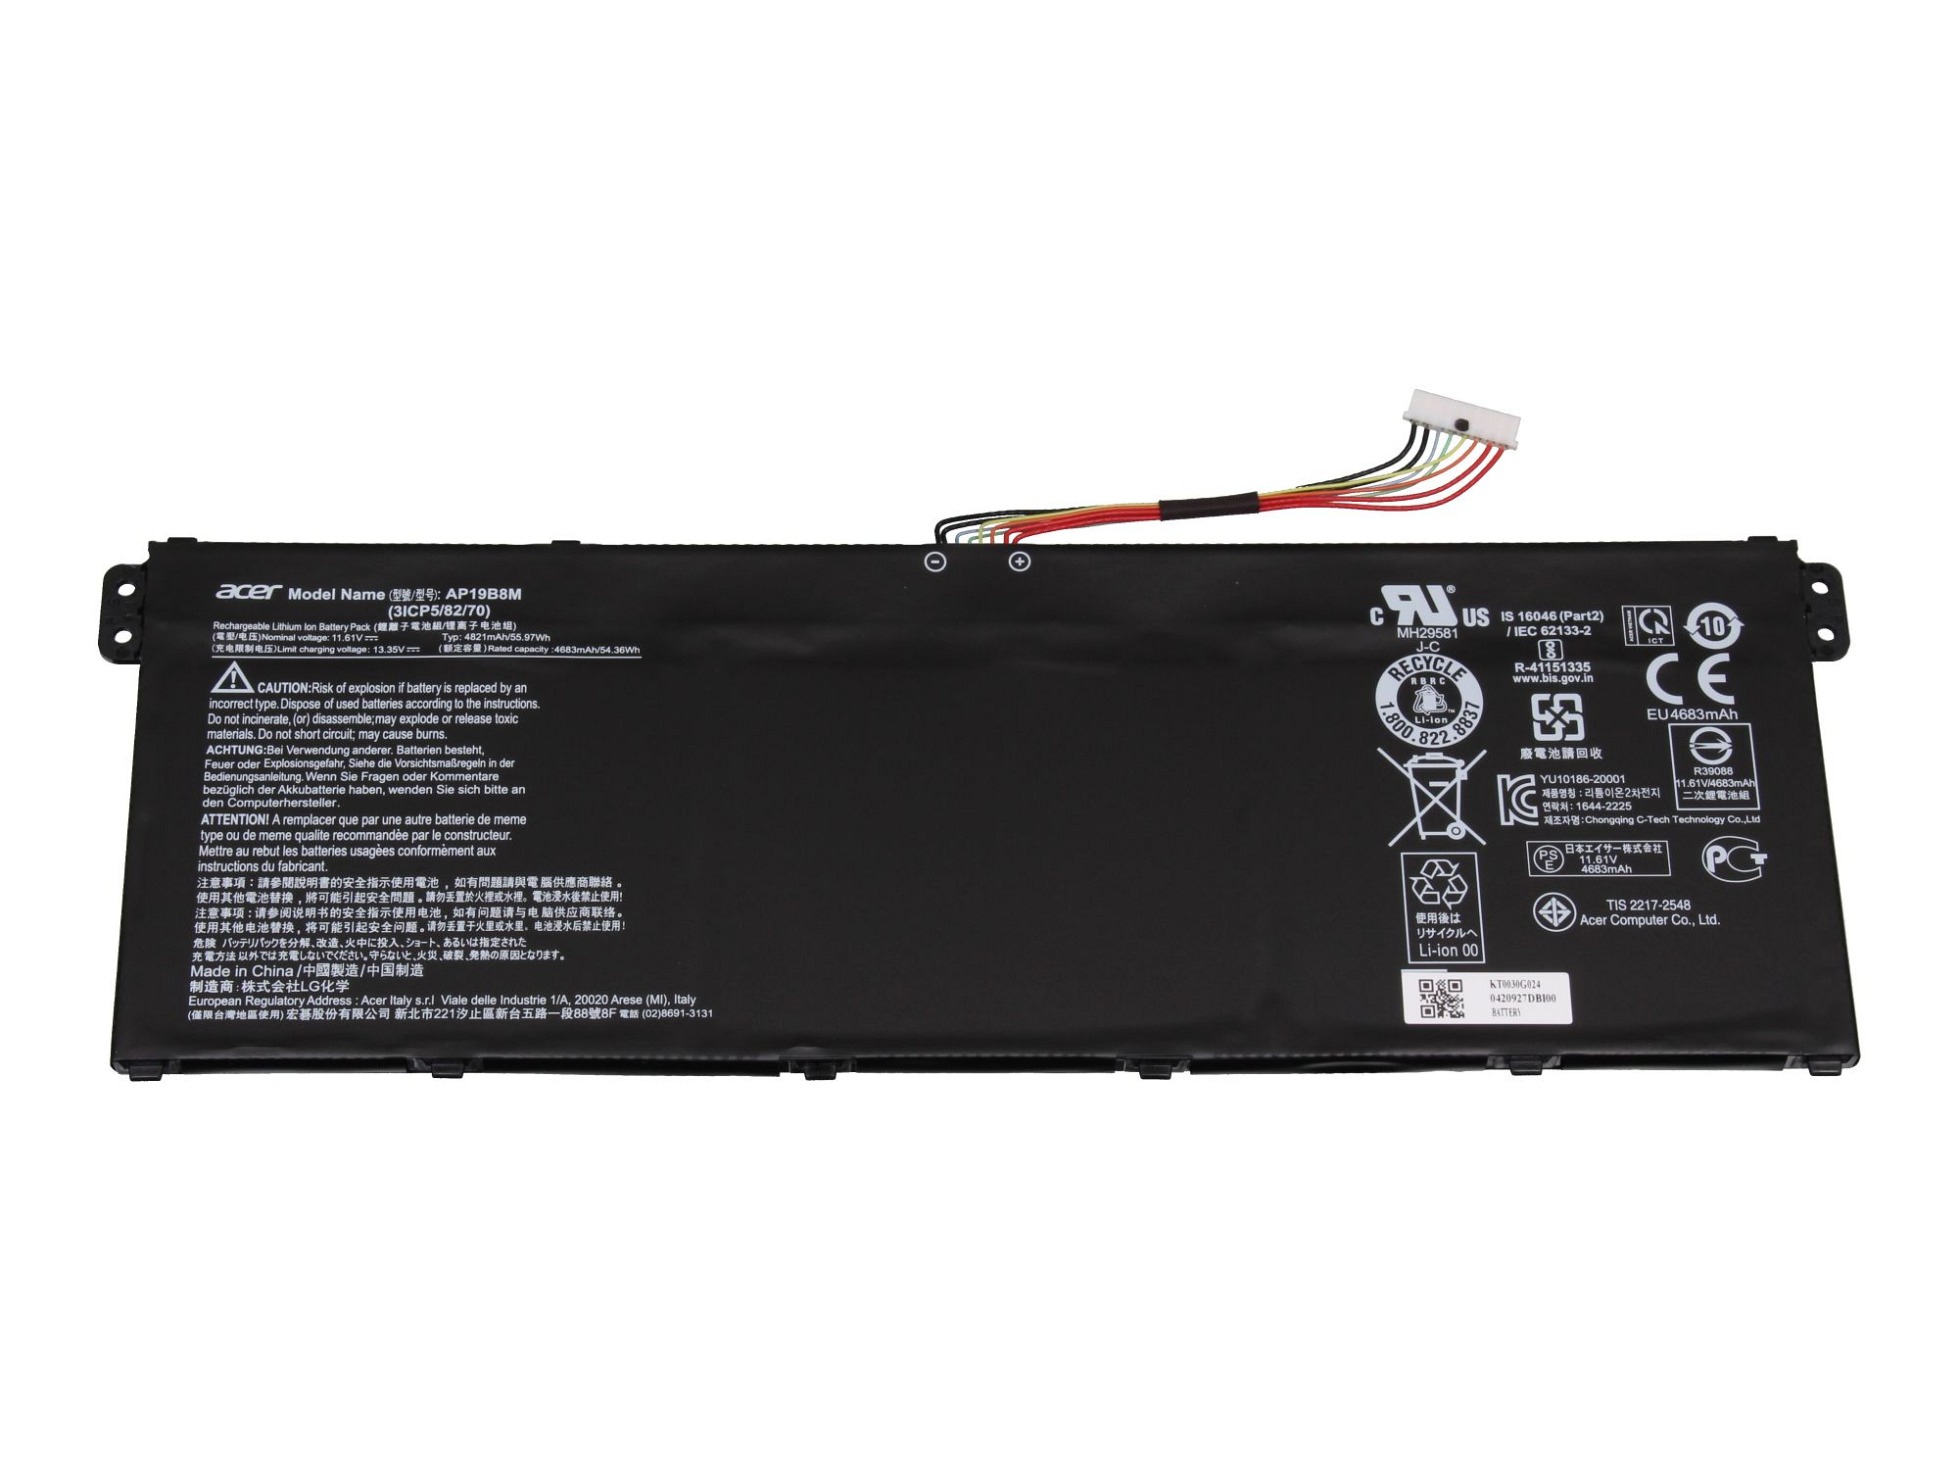 Acer Chromebook Spin 514 (CP514-1WH) original Batterie 55,9Wh 11.61V (Type AP19B8M)